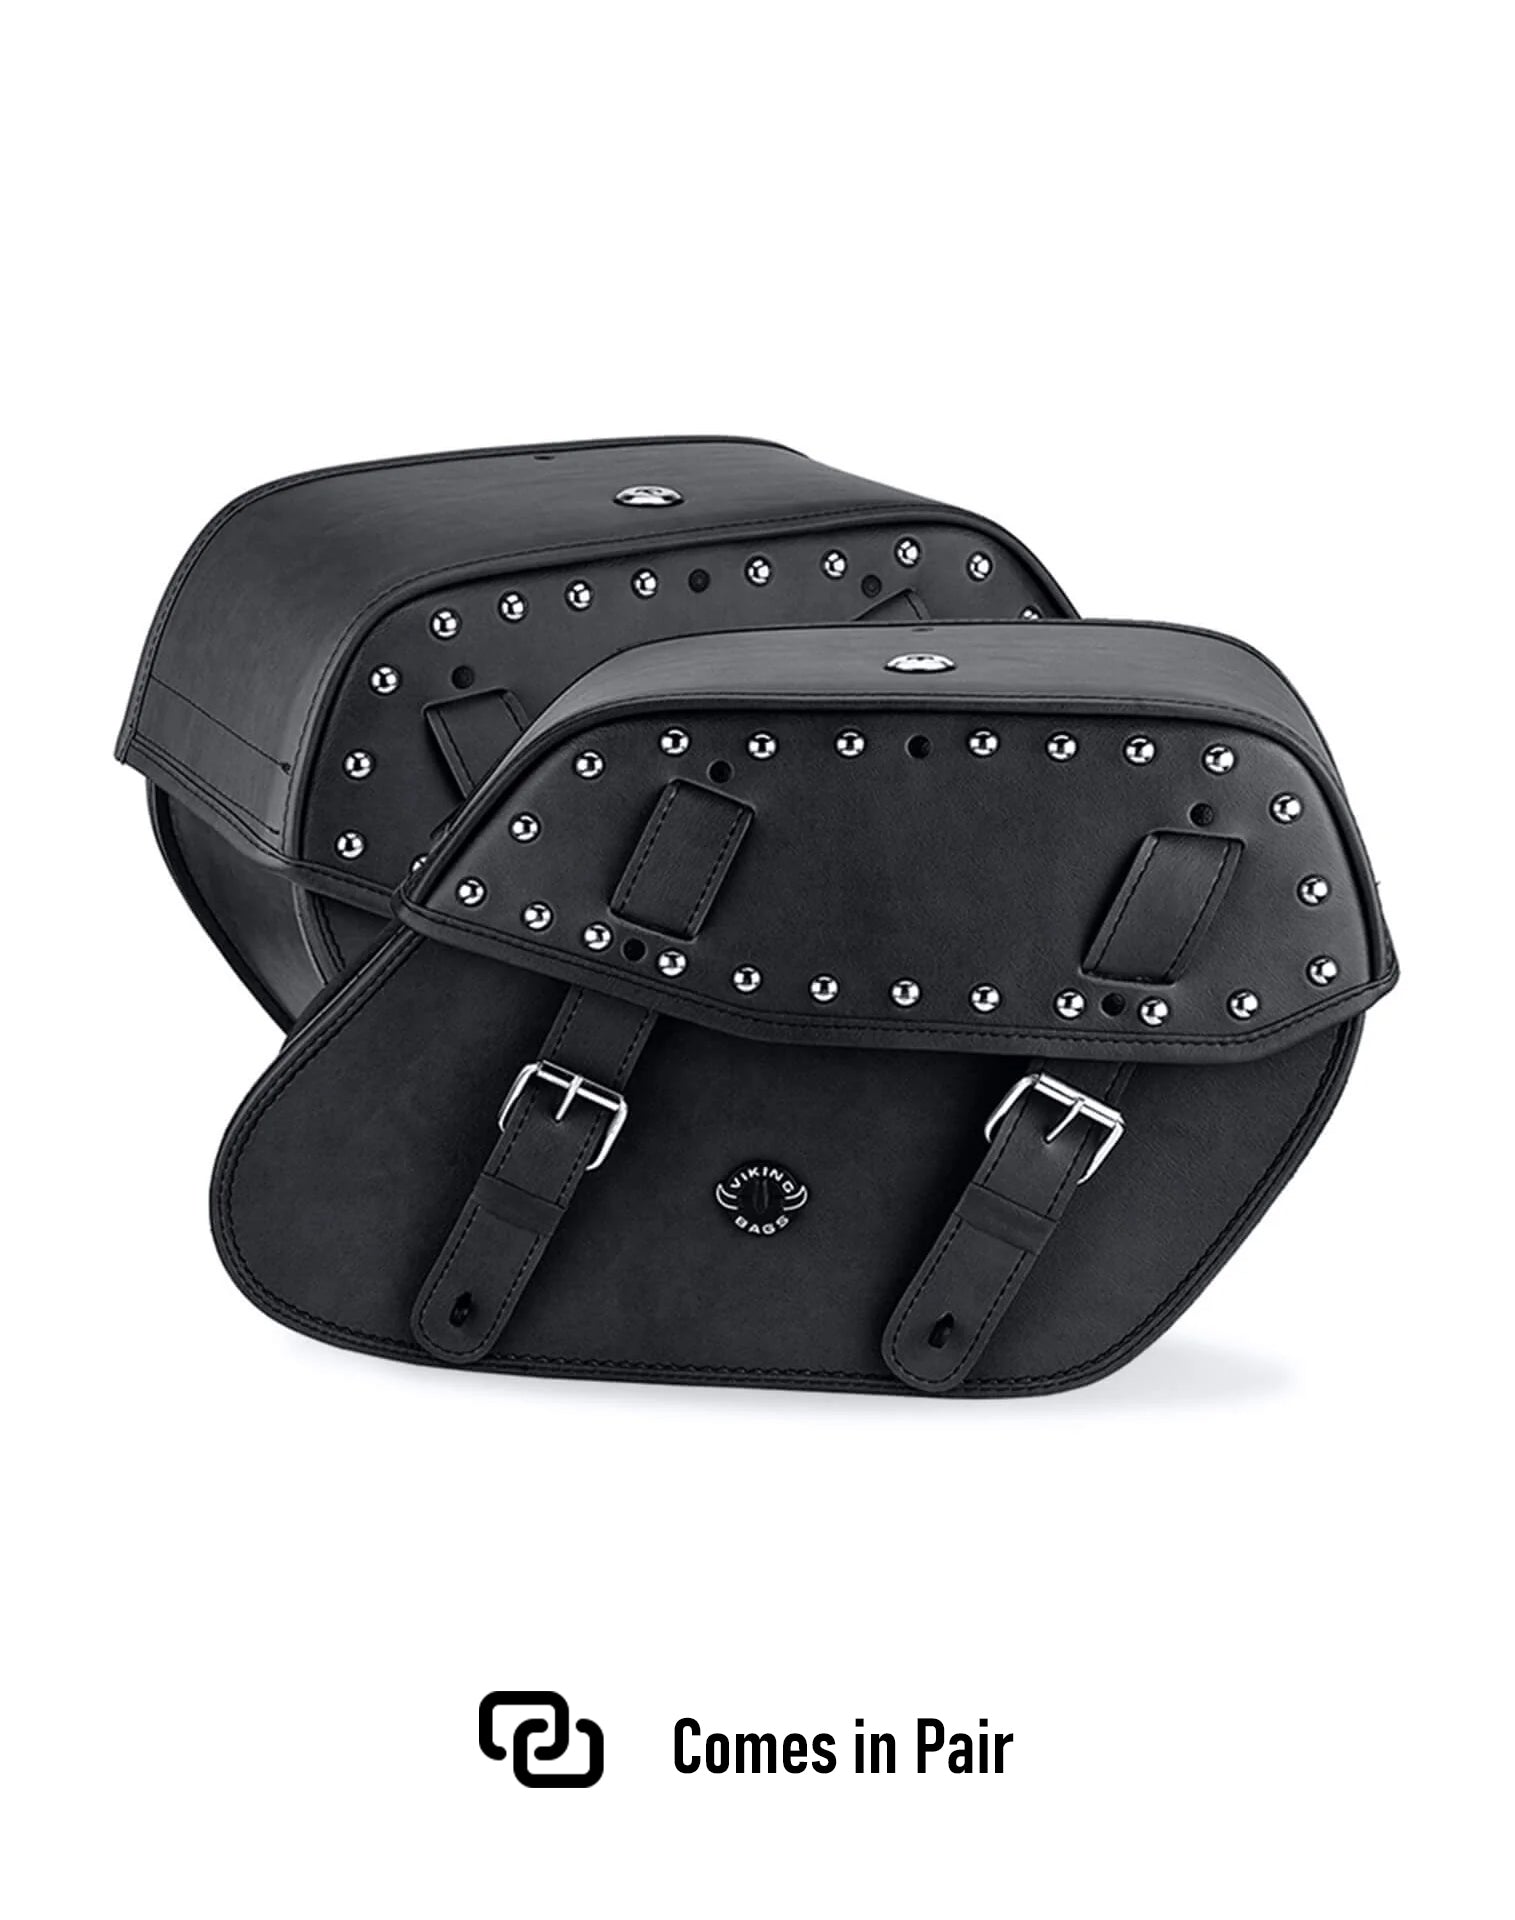 Viking Odin Large Studded Leather Motorcycle Saddlebags For Harley Softail Heritage Flst I C Ci Weather Resistant Bags Comes in Pair